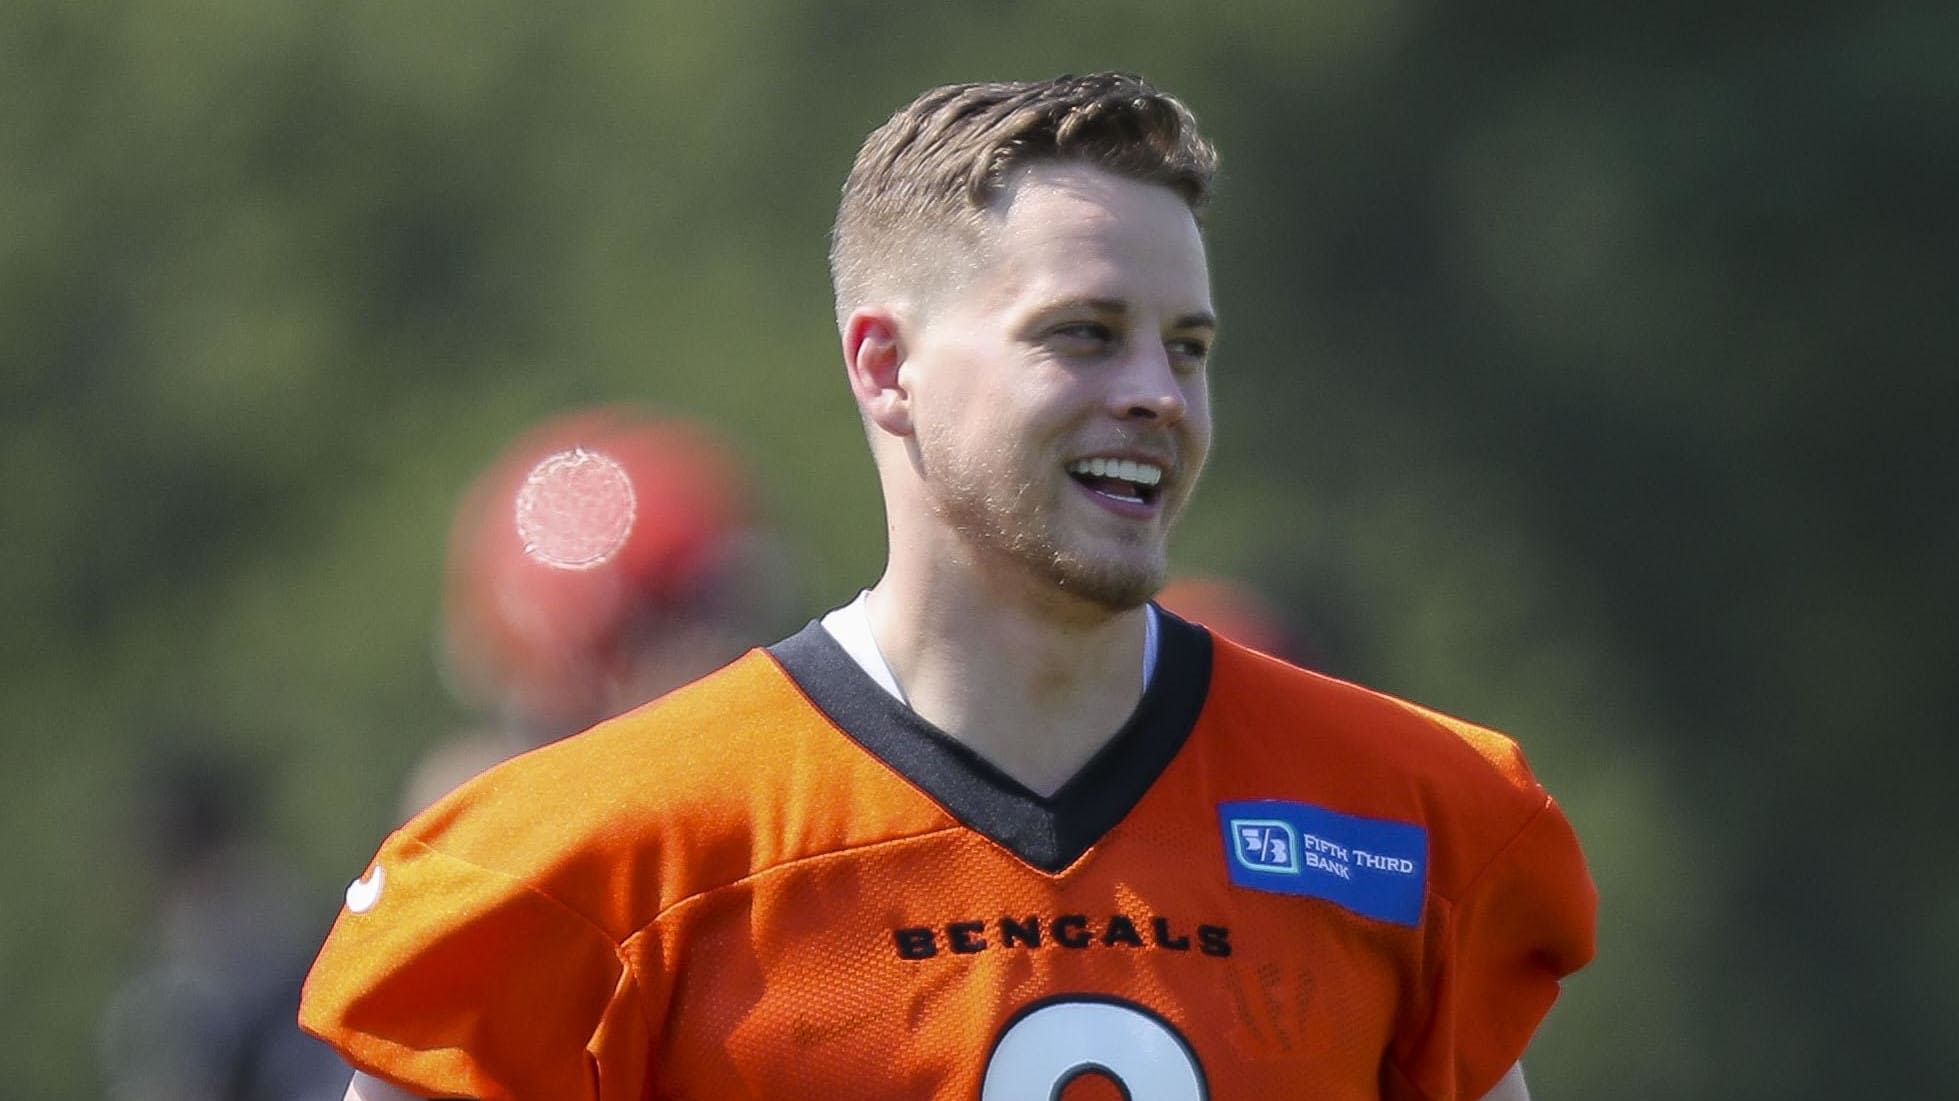 Joe Burrow Returns to Practice: An Update on His Recovery and What's Next for the Bengals Star